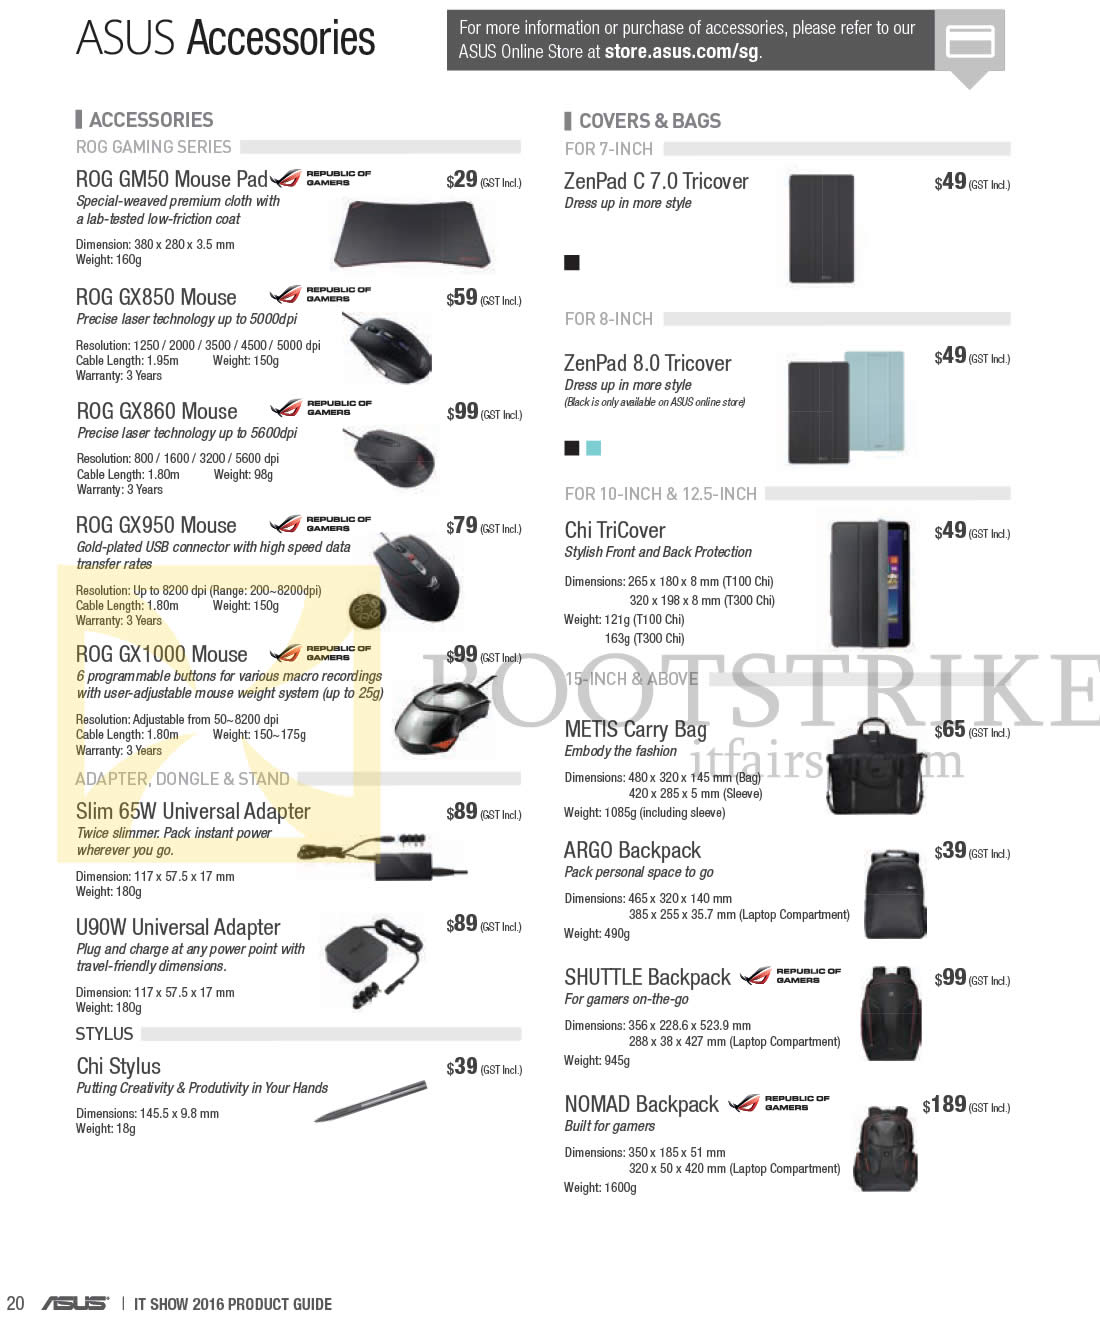 IT SHOW 2016 price list image brochure of ASUS Notebooks Accessories Mouse Pad, Mouse, Universal Adapter, Stylus Pen, Covers, Bags, Backpacks, ROG GM50, GX850, GX860, GX950, GX1000